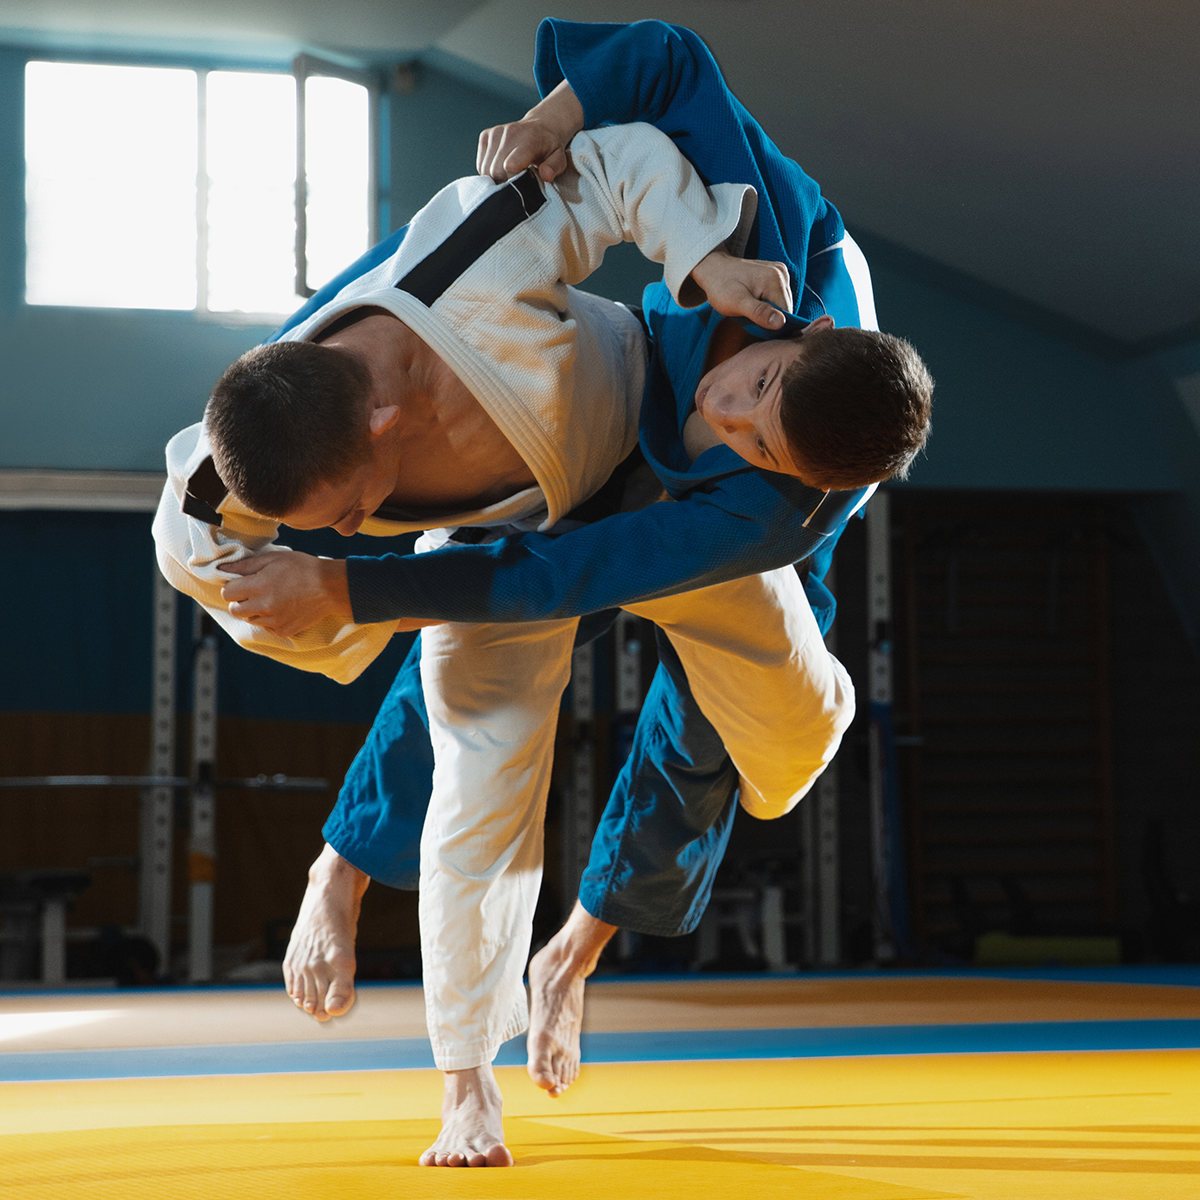 two men are practicing judo on a yellow mat